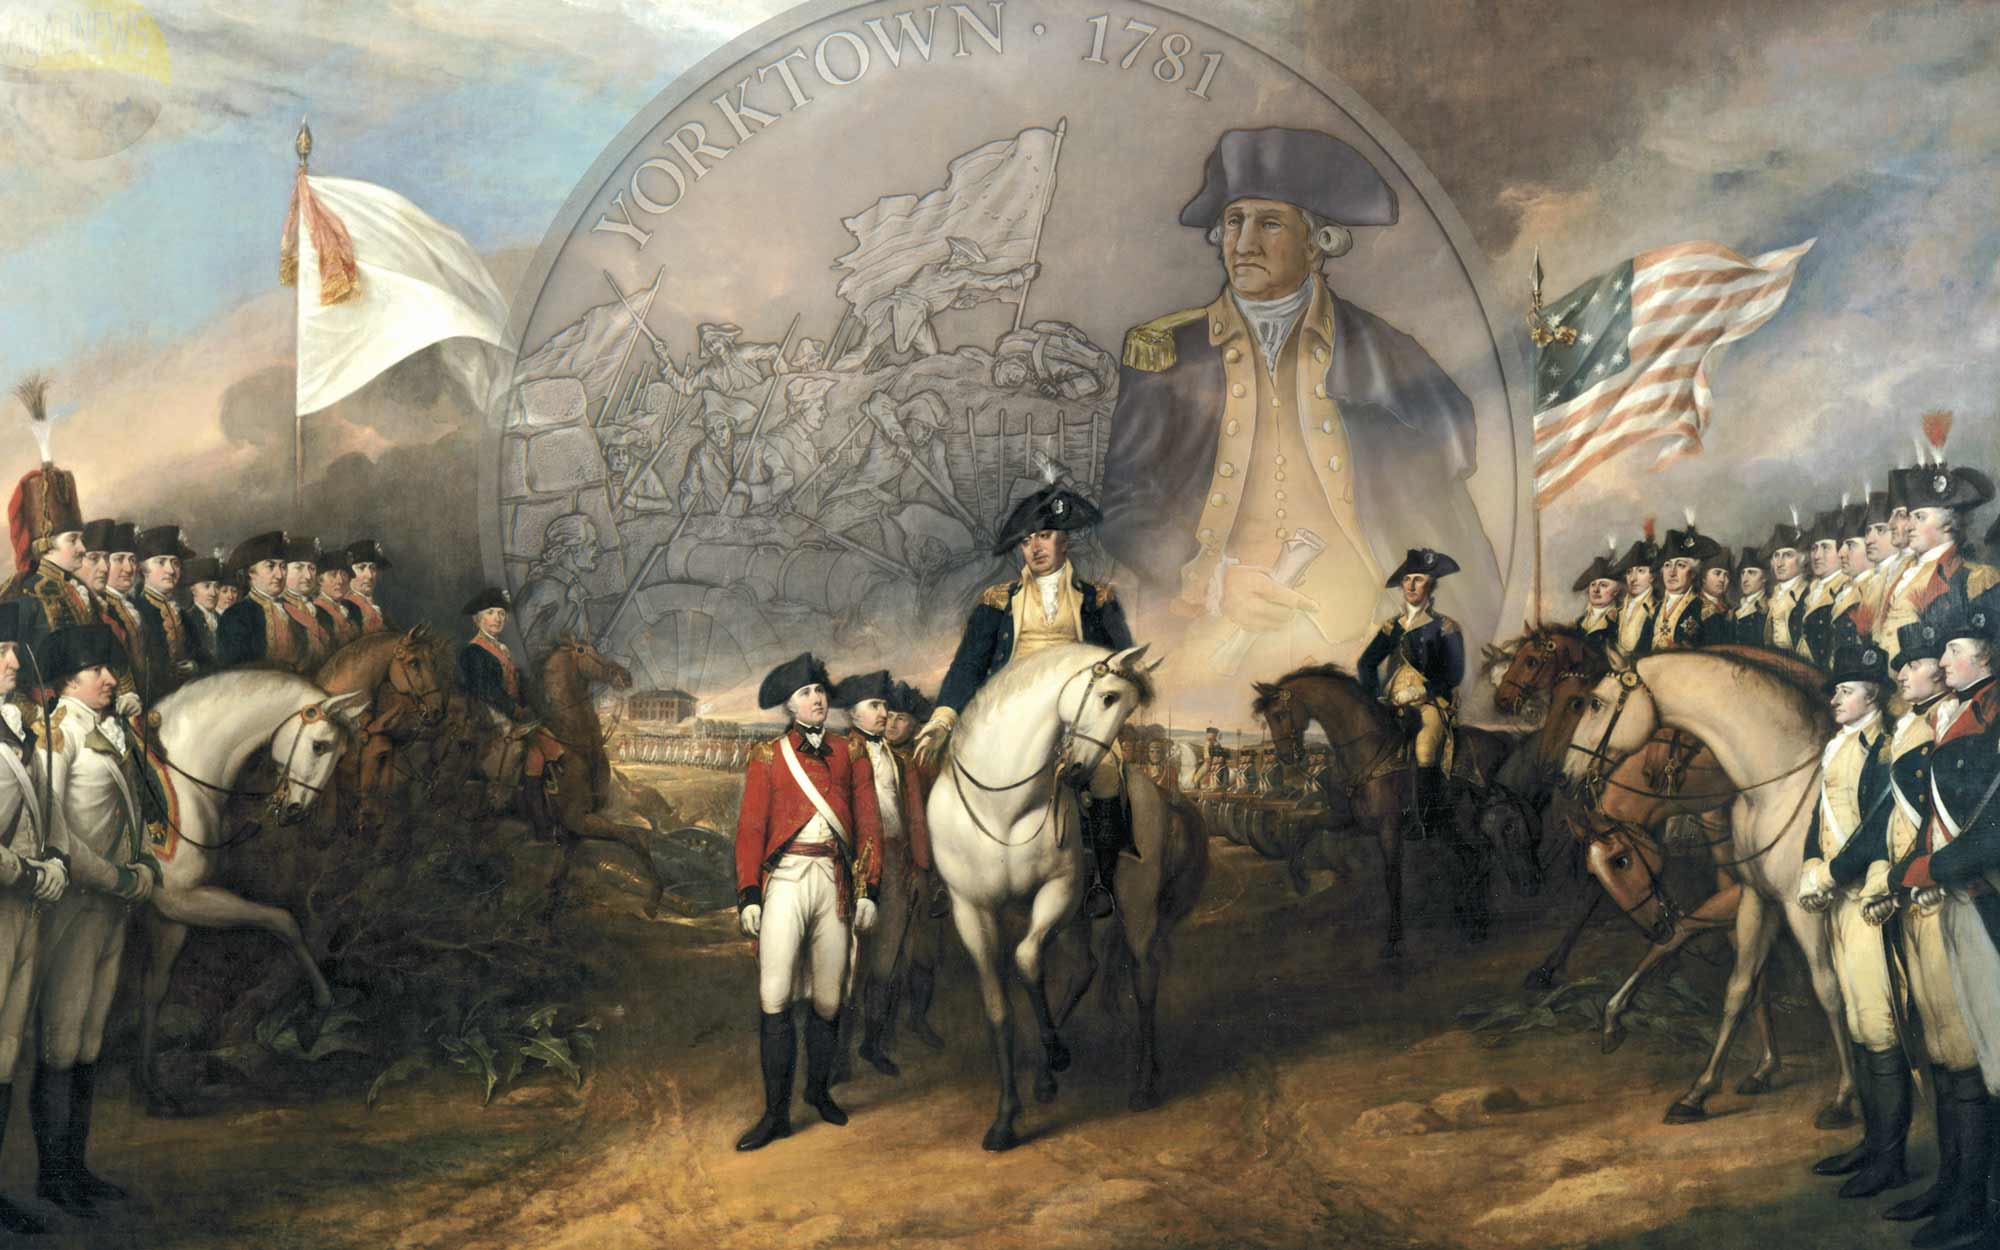 Virtual Marching Tour of the American Revolutionary War